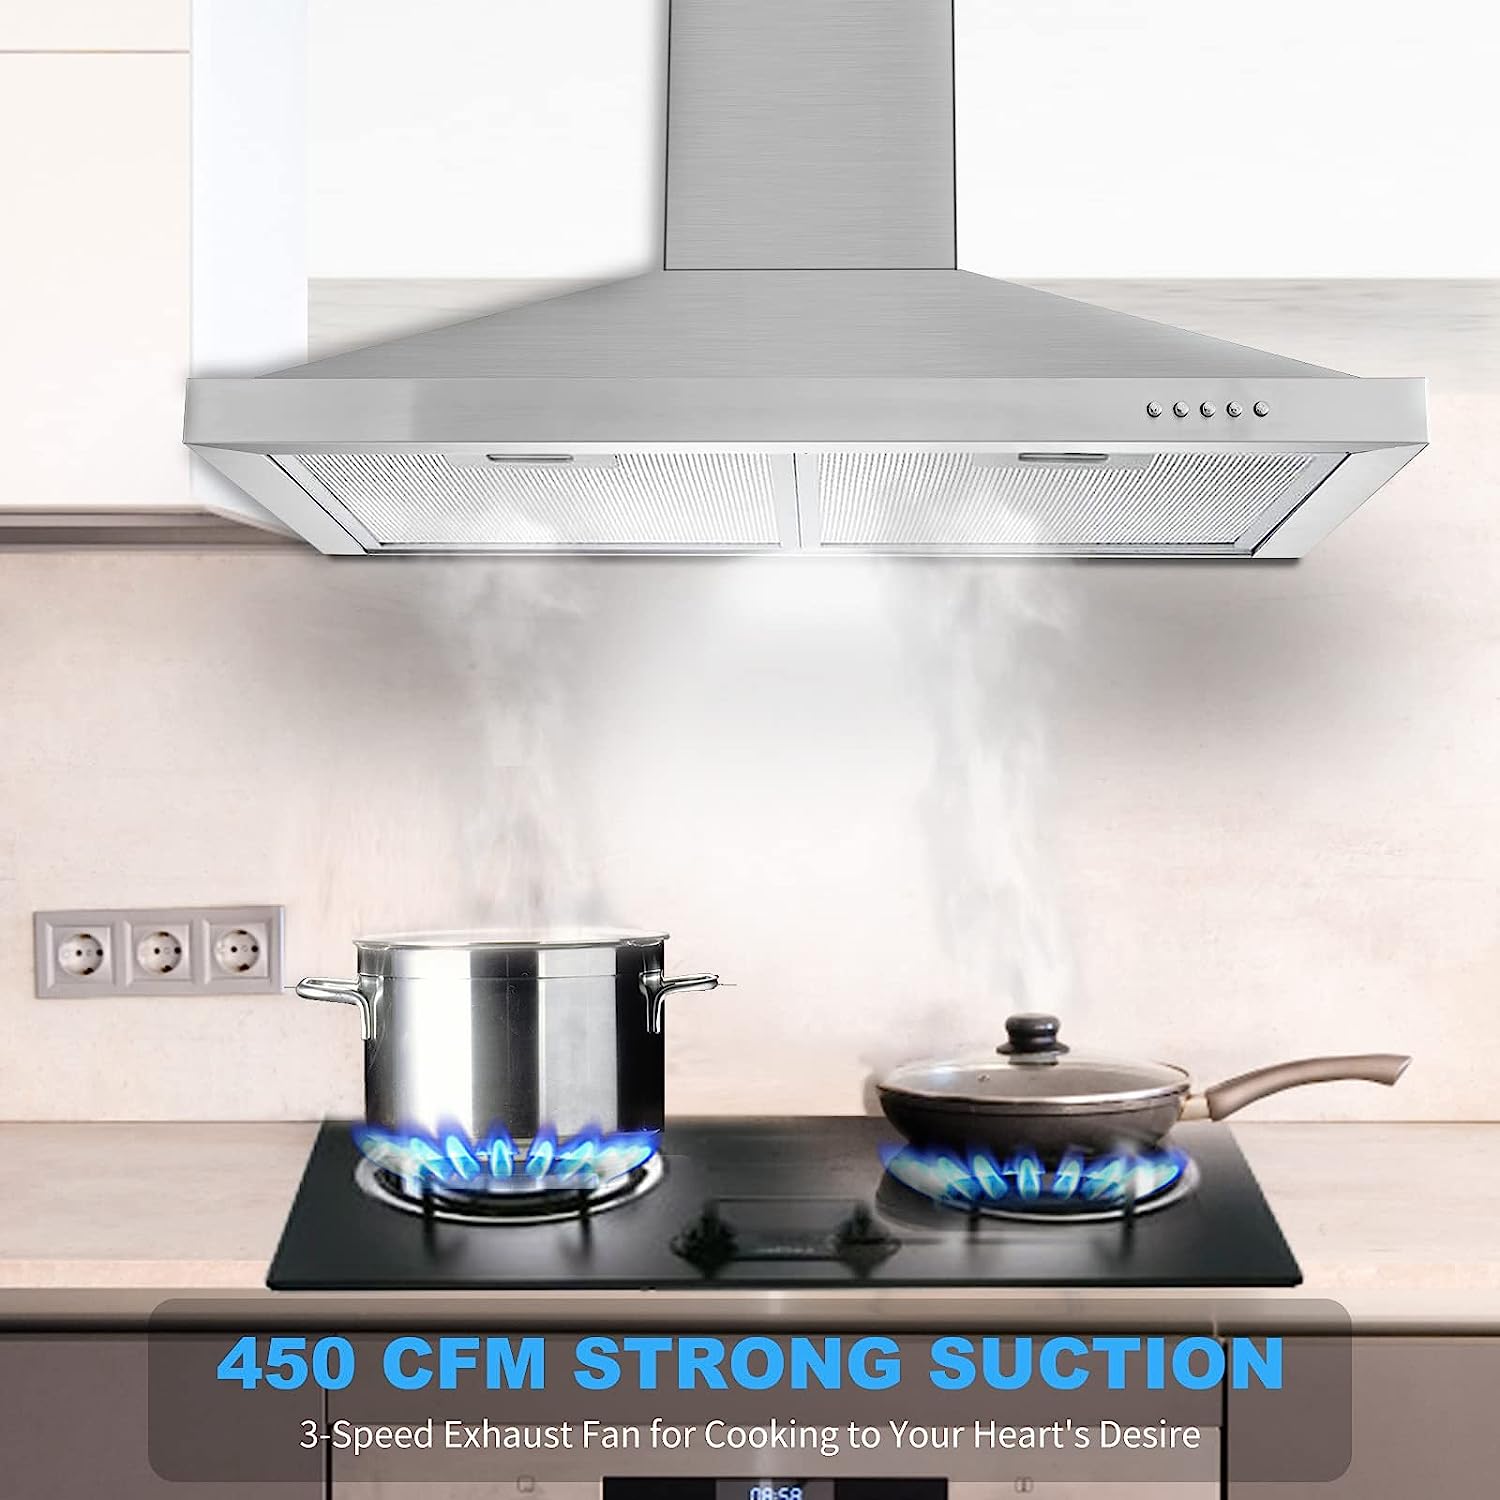 30 inch Ductless Wall-Mounted Range Hoods at